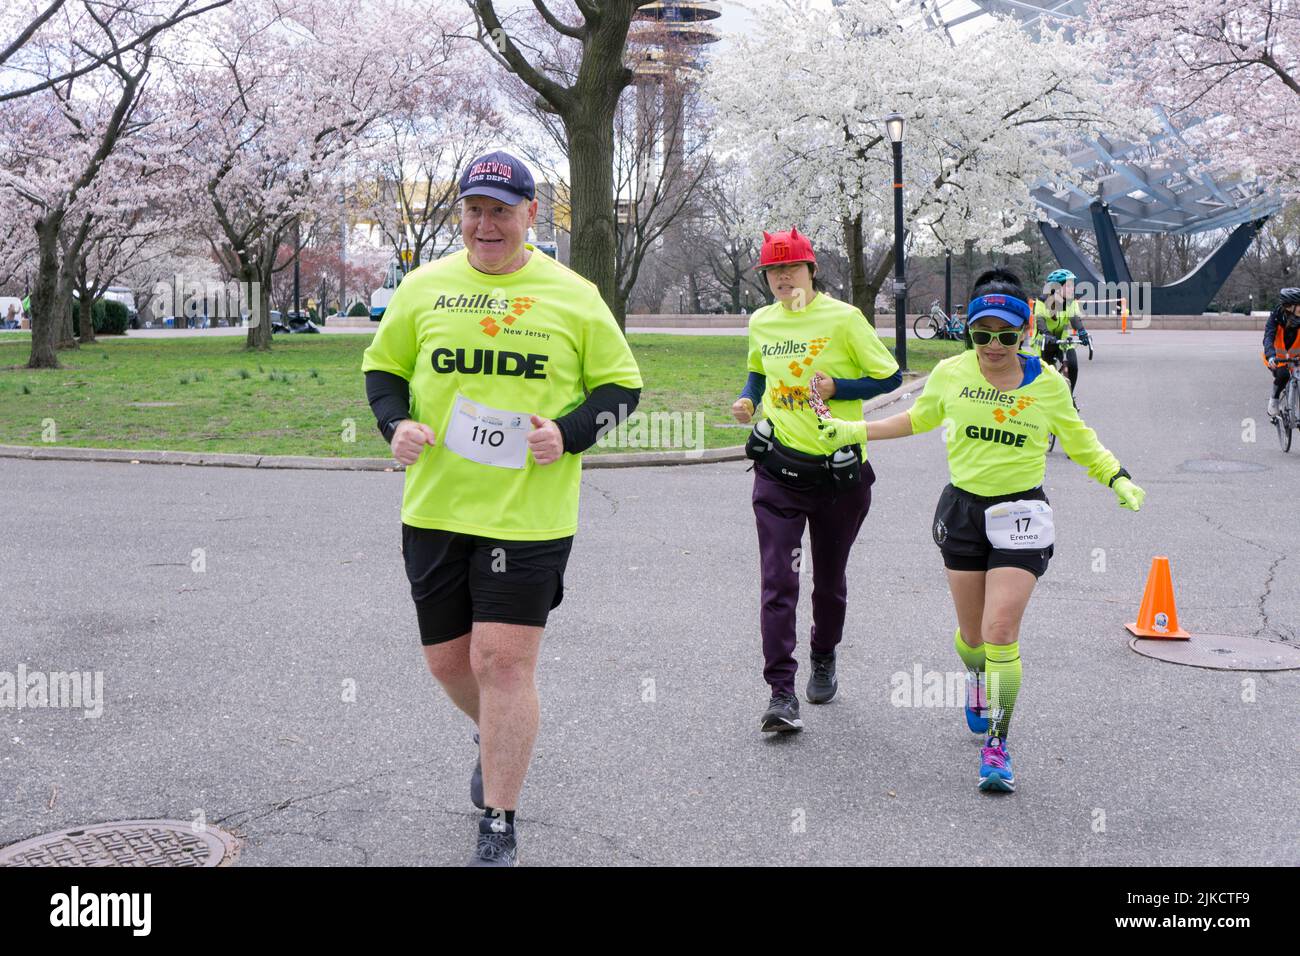 Volunteers from the New Jersey Achilles International track club guide an Asian American woman through a half marathon in a park in Queens, New York. Stock Photo